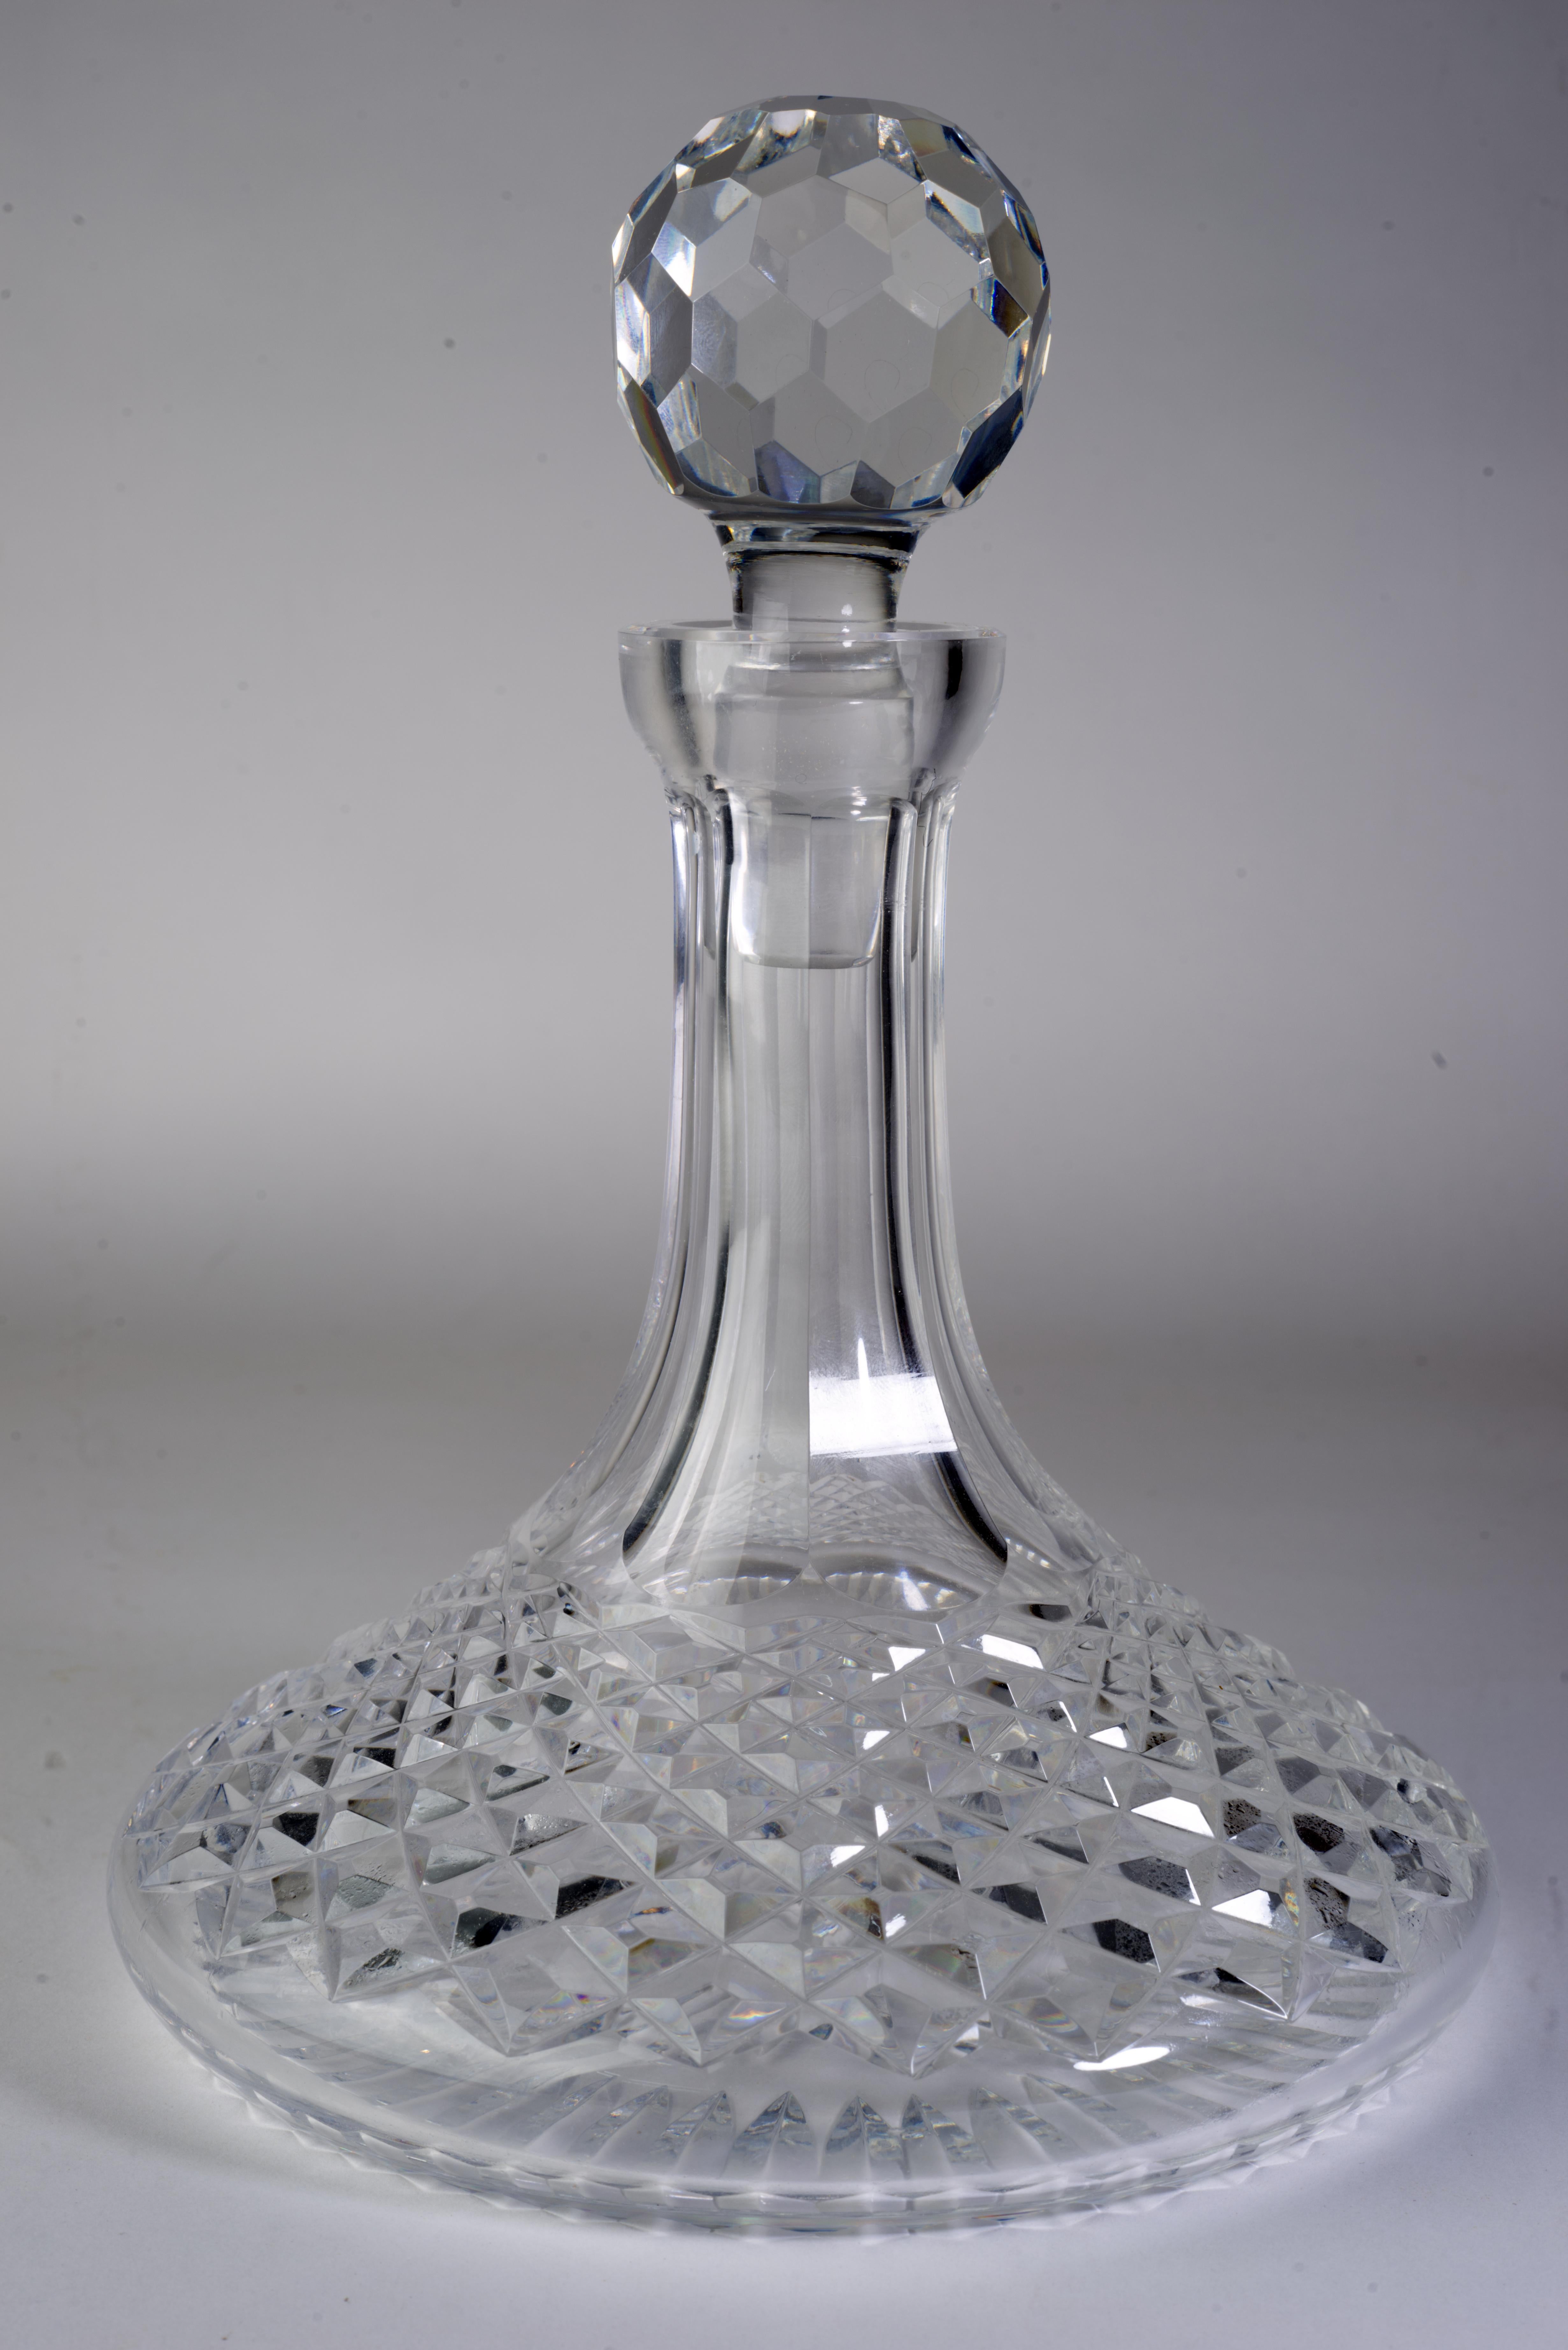  Vintage cut crystal ships decanter with stopper was made by Waterford in Alana pattern. The pattern was manufactured from 1952 to 2022; it is characterized by cut cross hatch with multi-sided stem.

The decanter is signed with etched Waterford mark